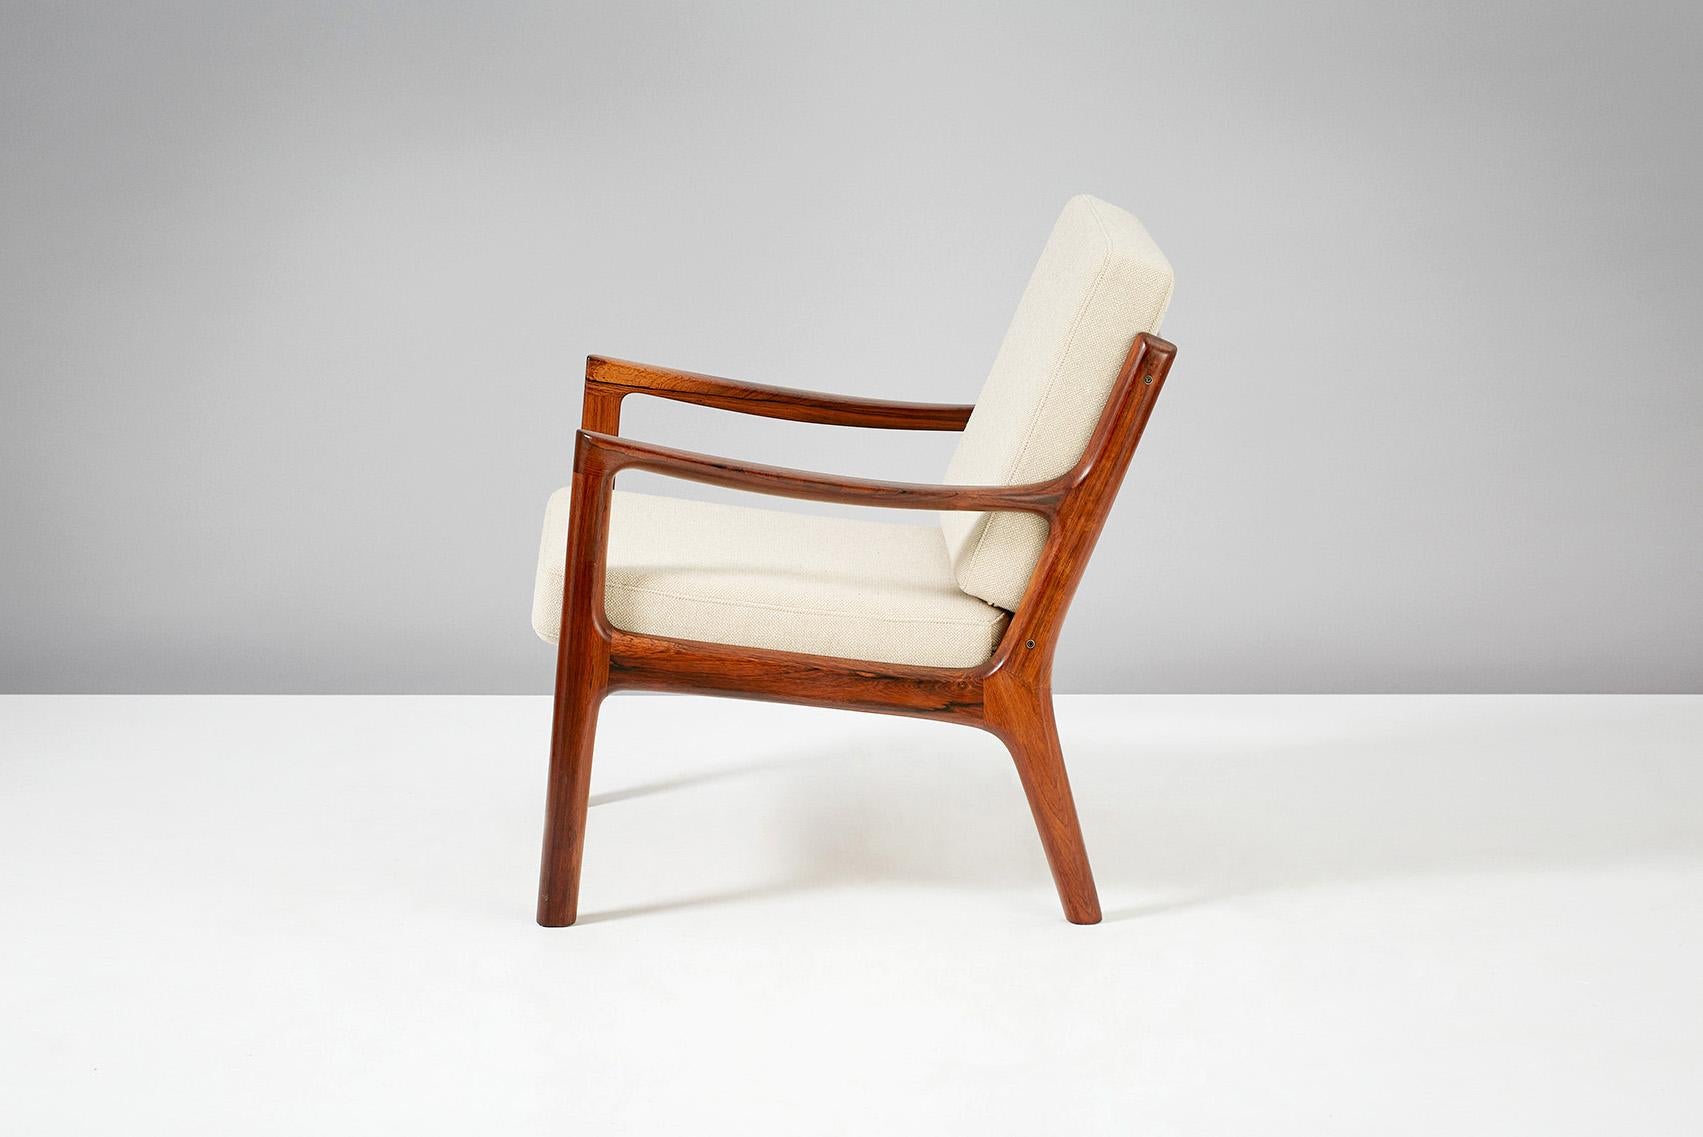 Ole Wanscher

Senator lounge chair, circa 1960

Limited edition rosewood version of this iconic design, produced by France & Son, Denmark. Includes maker's badge. New cushions covered in oatmeal color wool fabric.